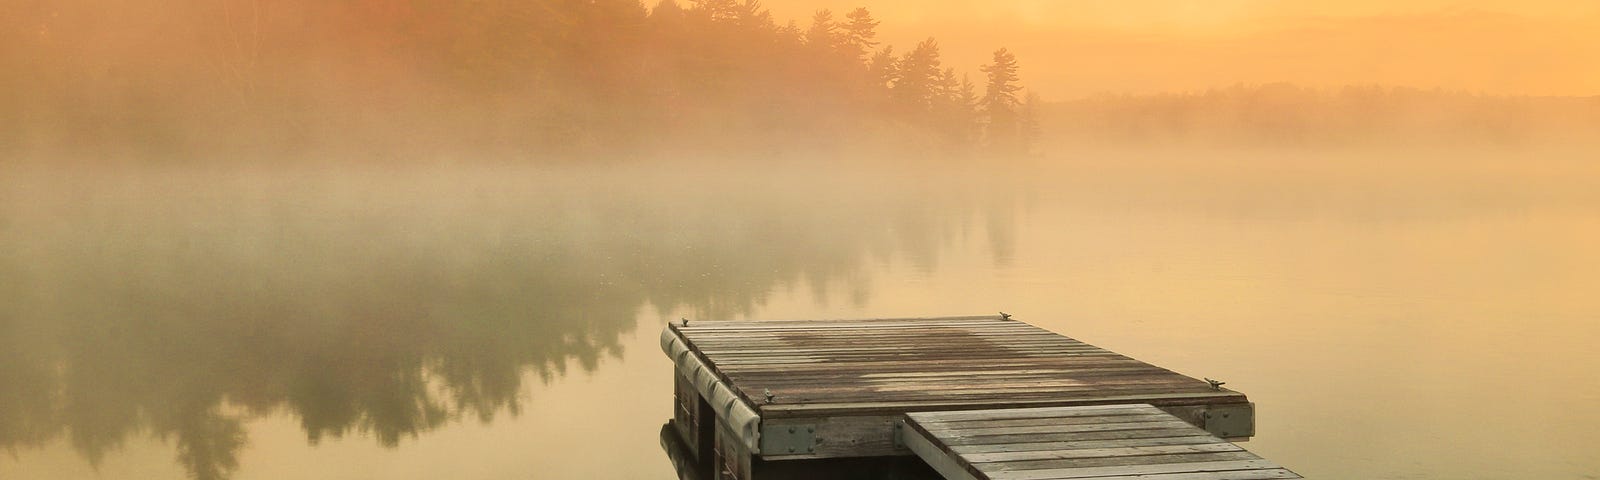 Fog over calm lake at sunrise with boat launch dock.